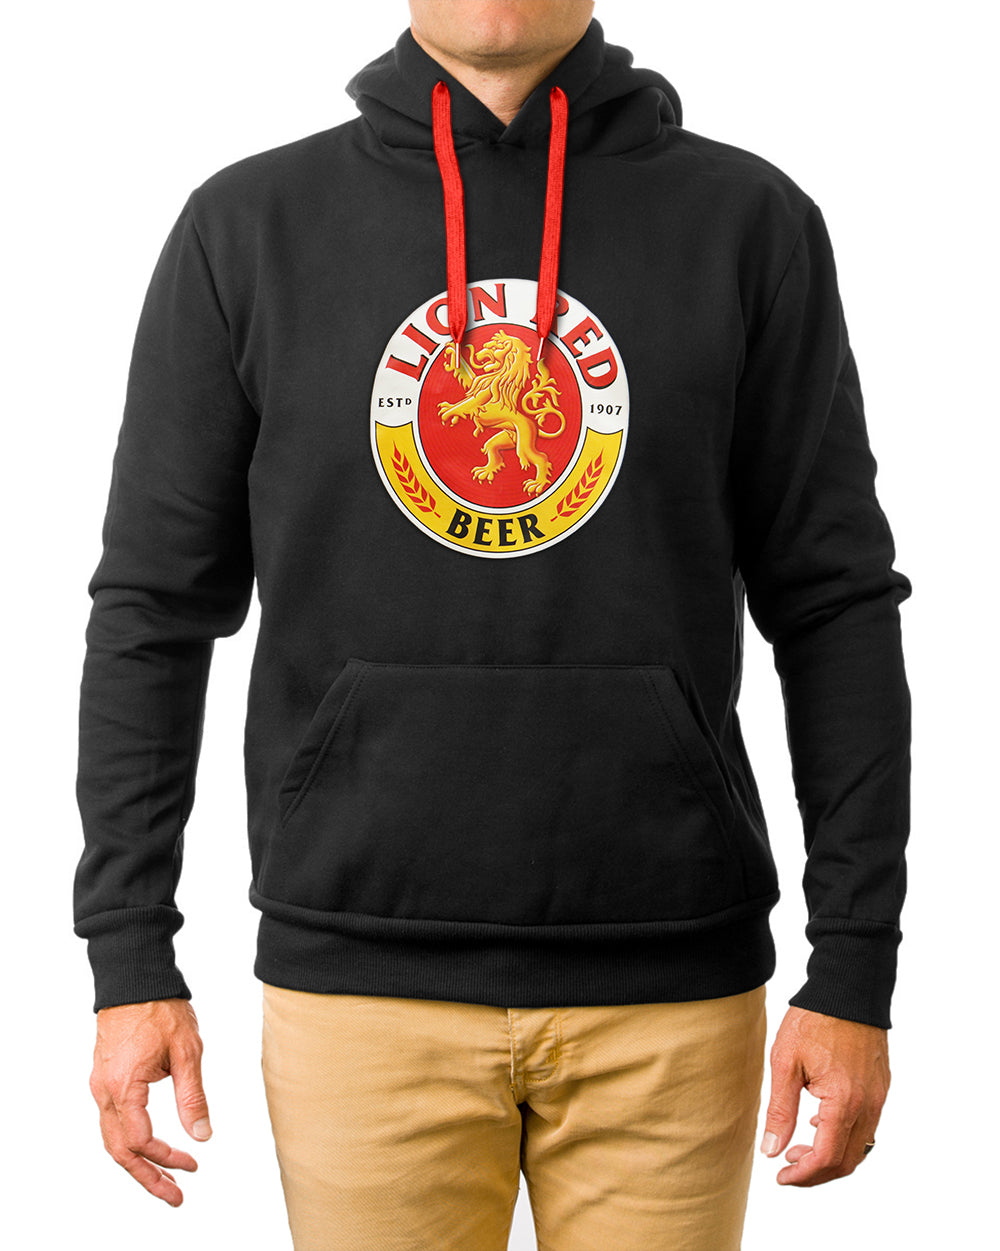 Lion Red Hoodie -  Beer Gear Apparel & Merchandise - Speights - Lion Red - VB - Tokyo Dy merch